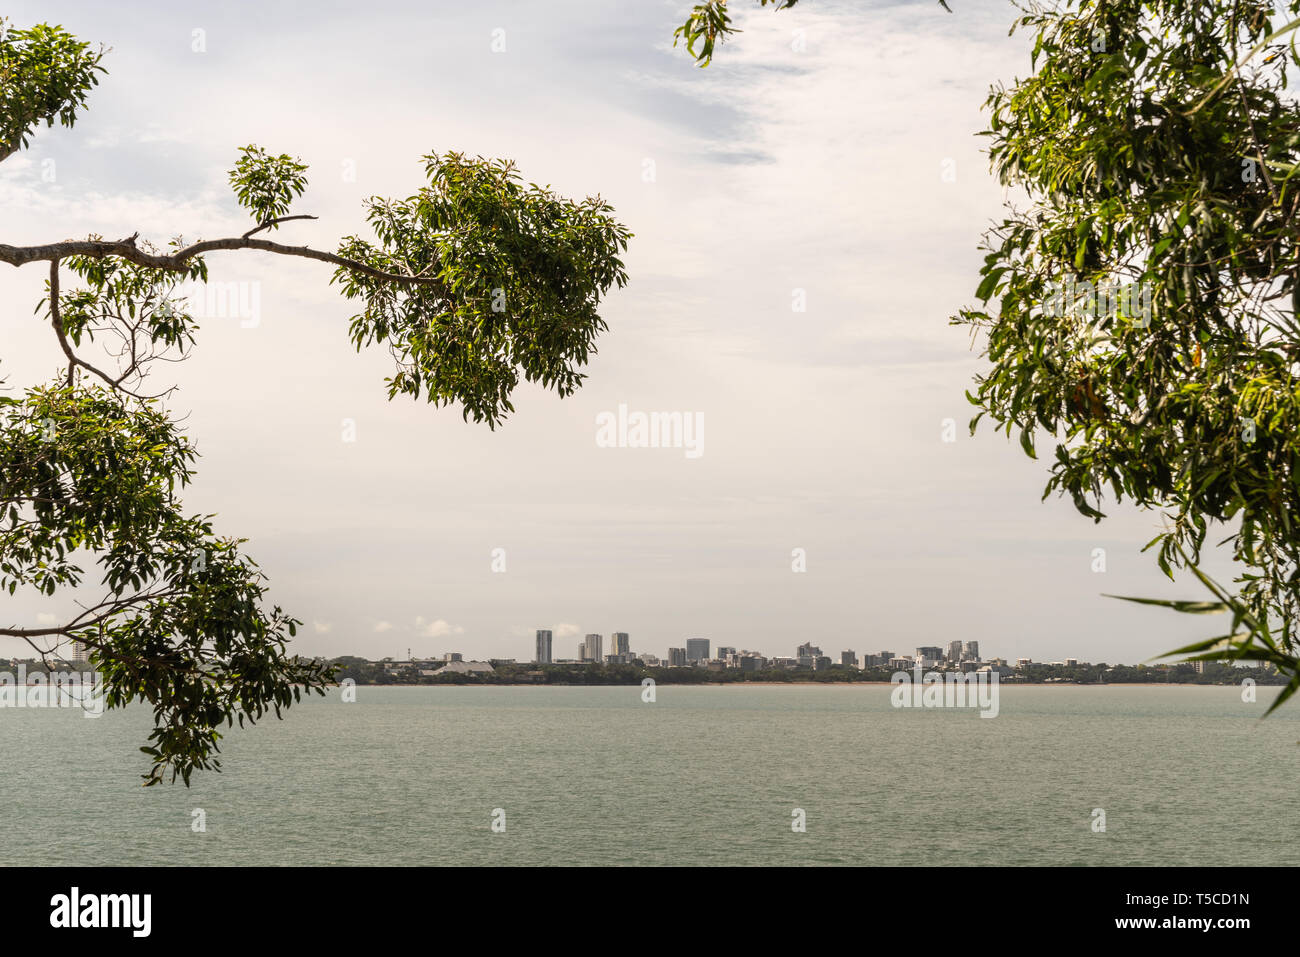 Darwin Australia - February 22, 2019: Darwin skyline seen from East Point over Fannie Bay sea water under light cloudy sky with green foliages on the  Stock Photo